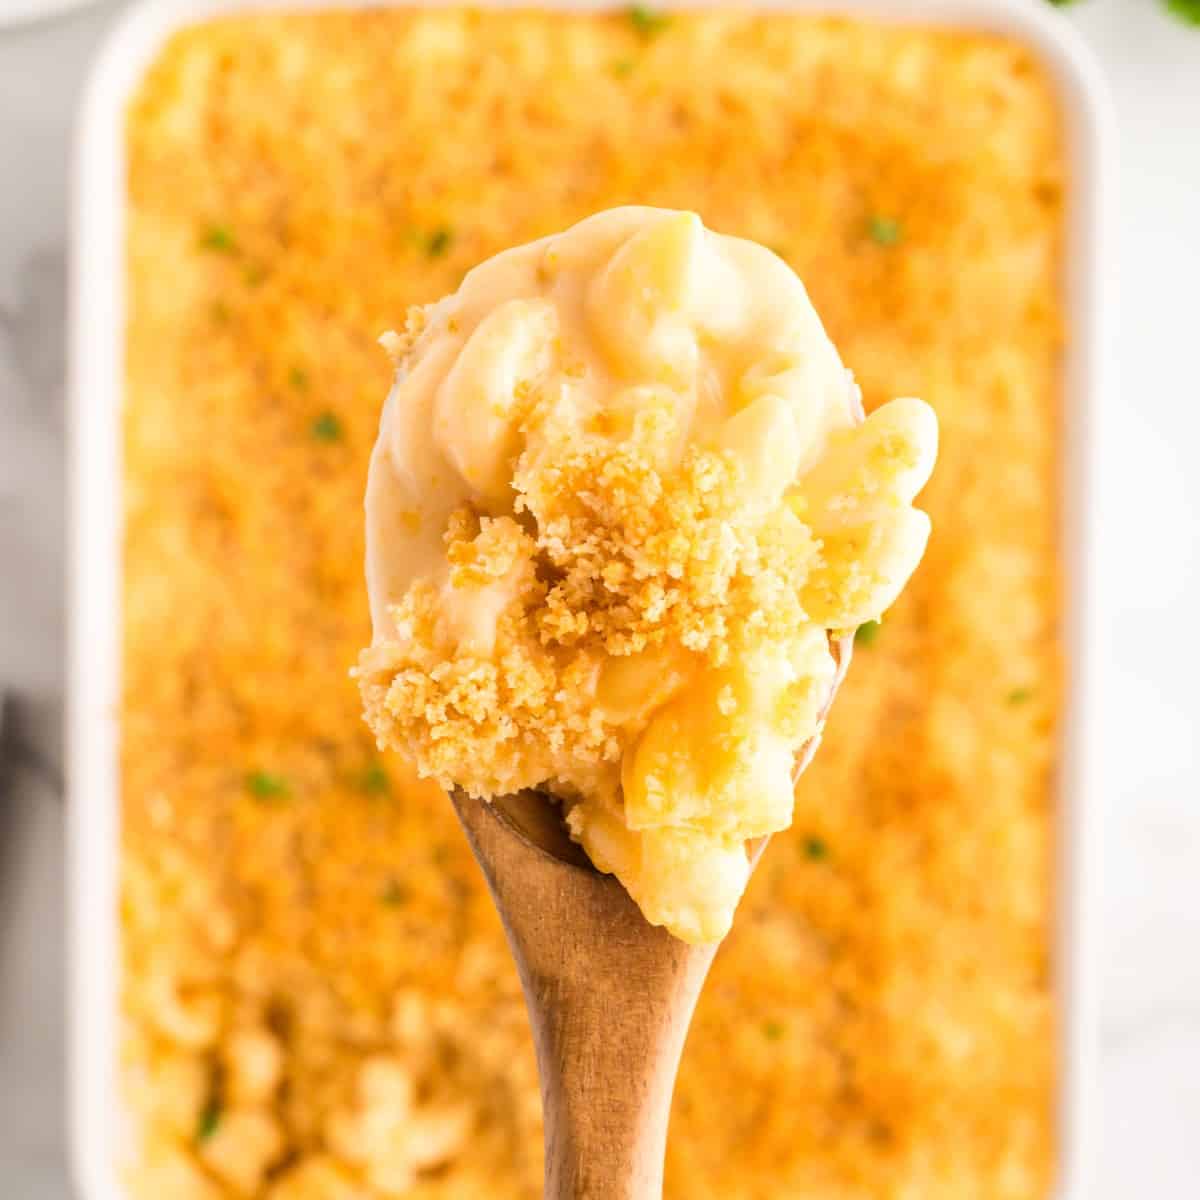 A spoonful of Southern Mac and Cheese over the casserole.